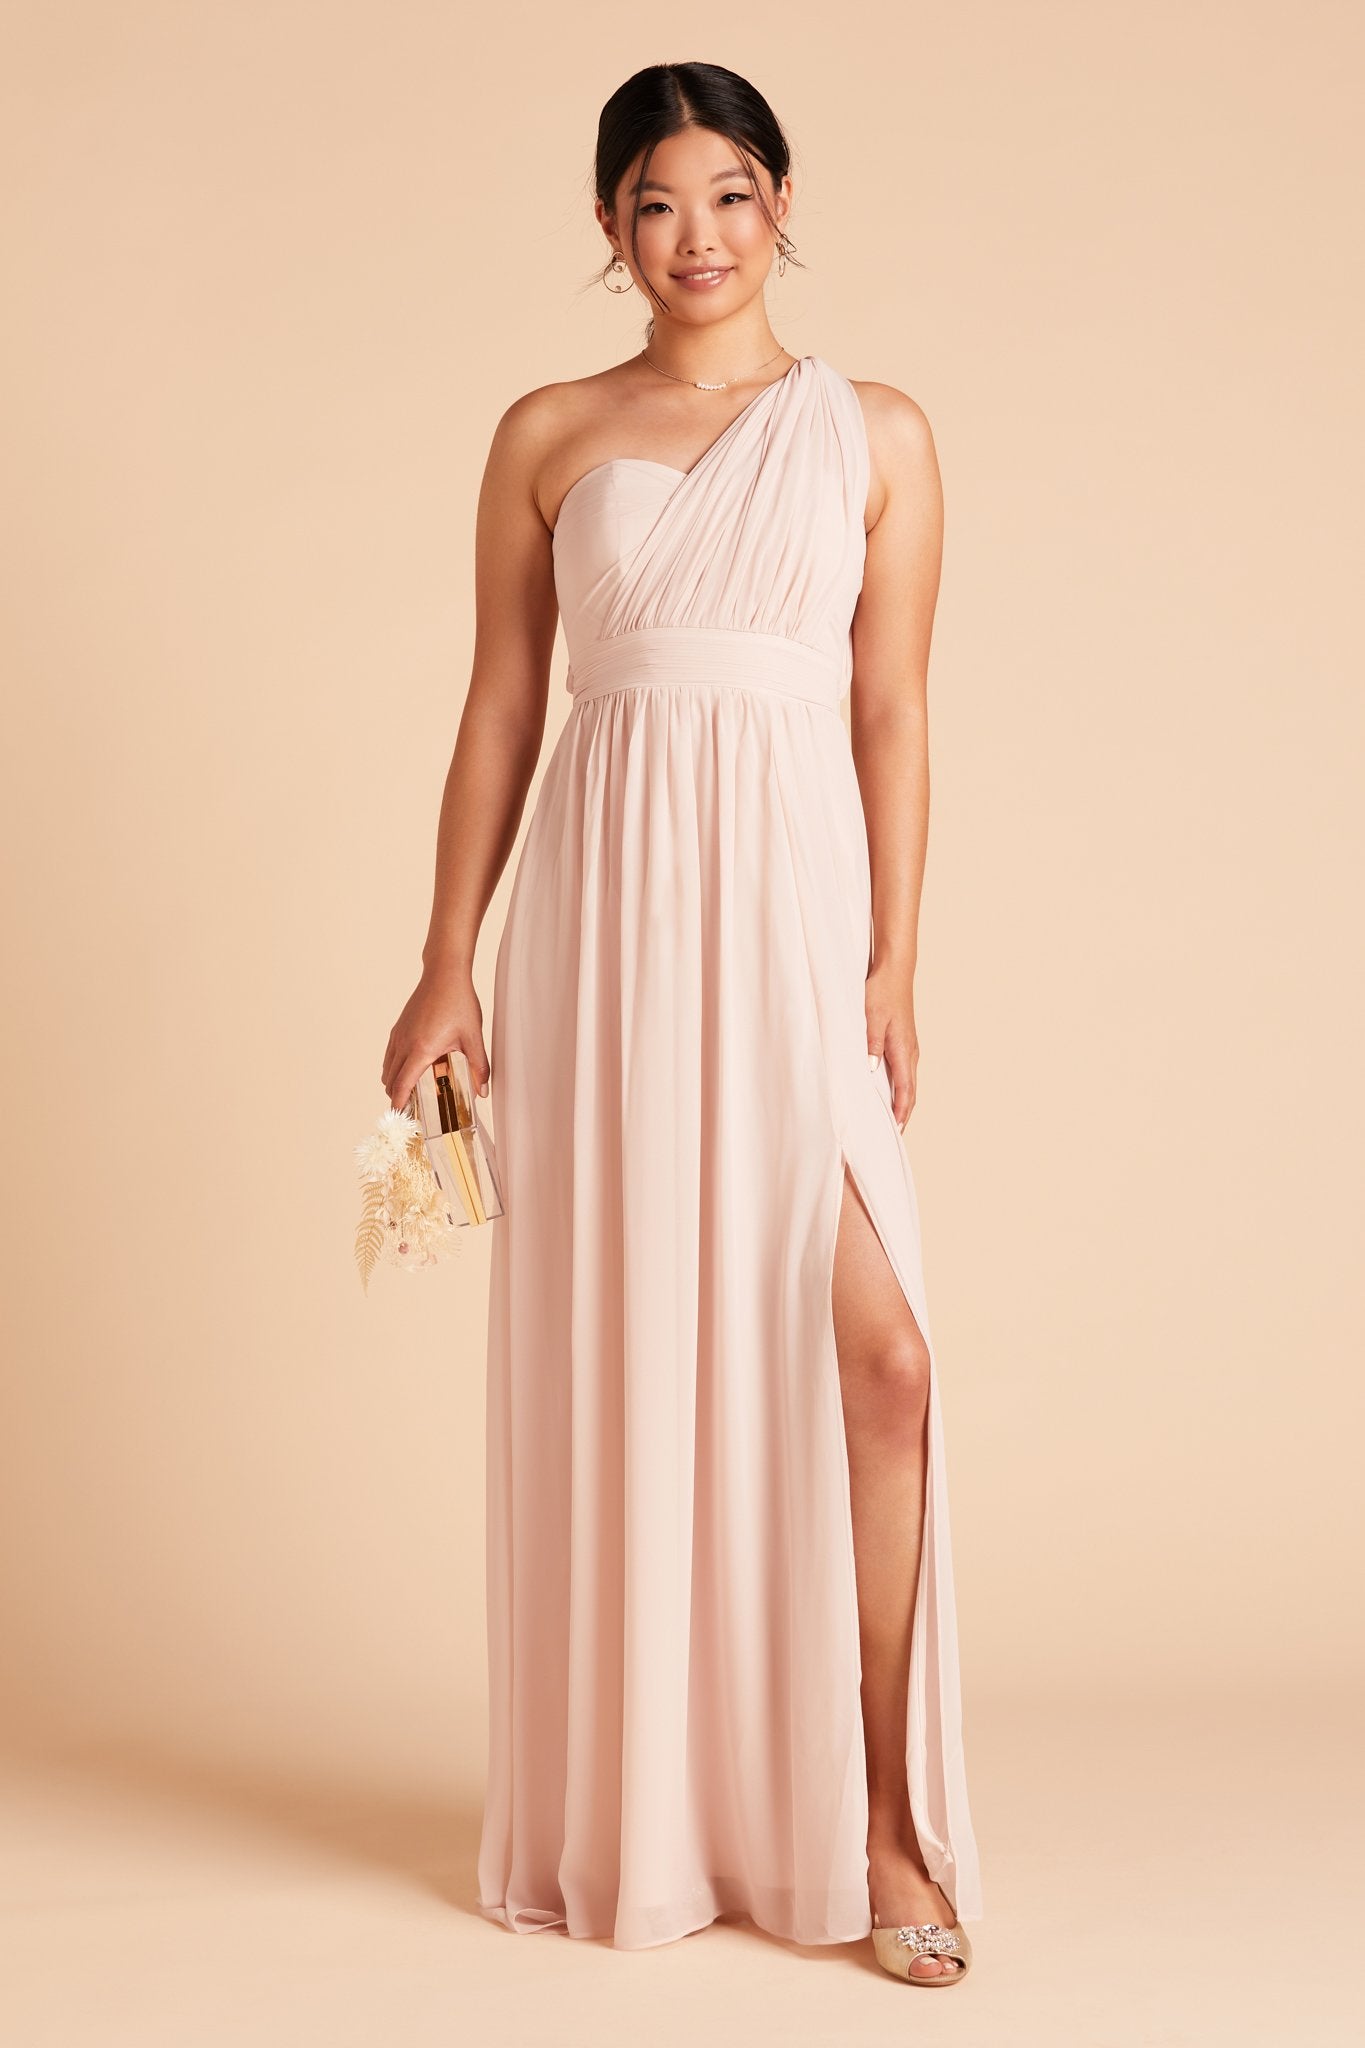 Grace convertible bridesmaid dress in pale blush pink chiffon by Birdy Grey, front view